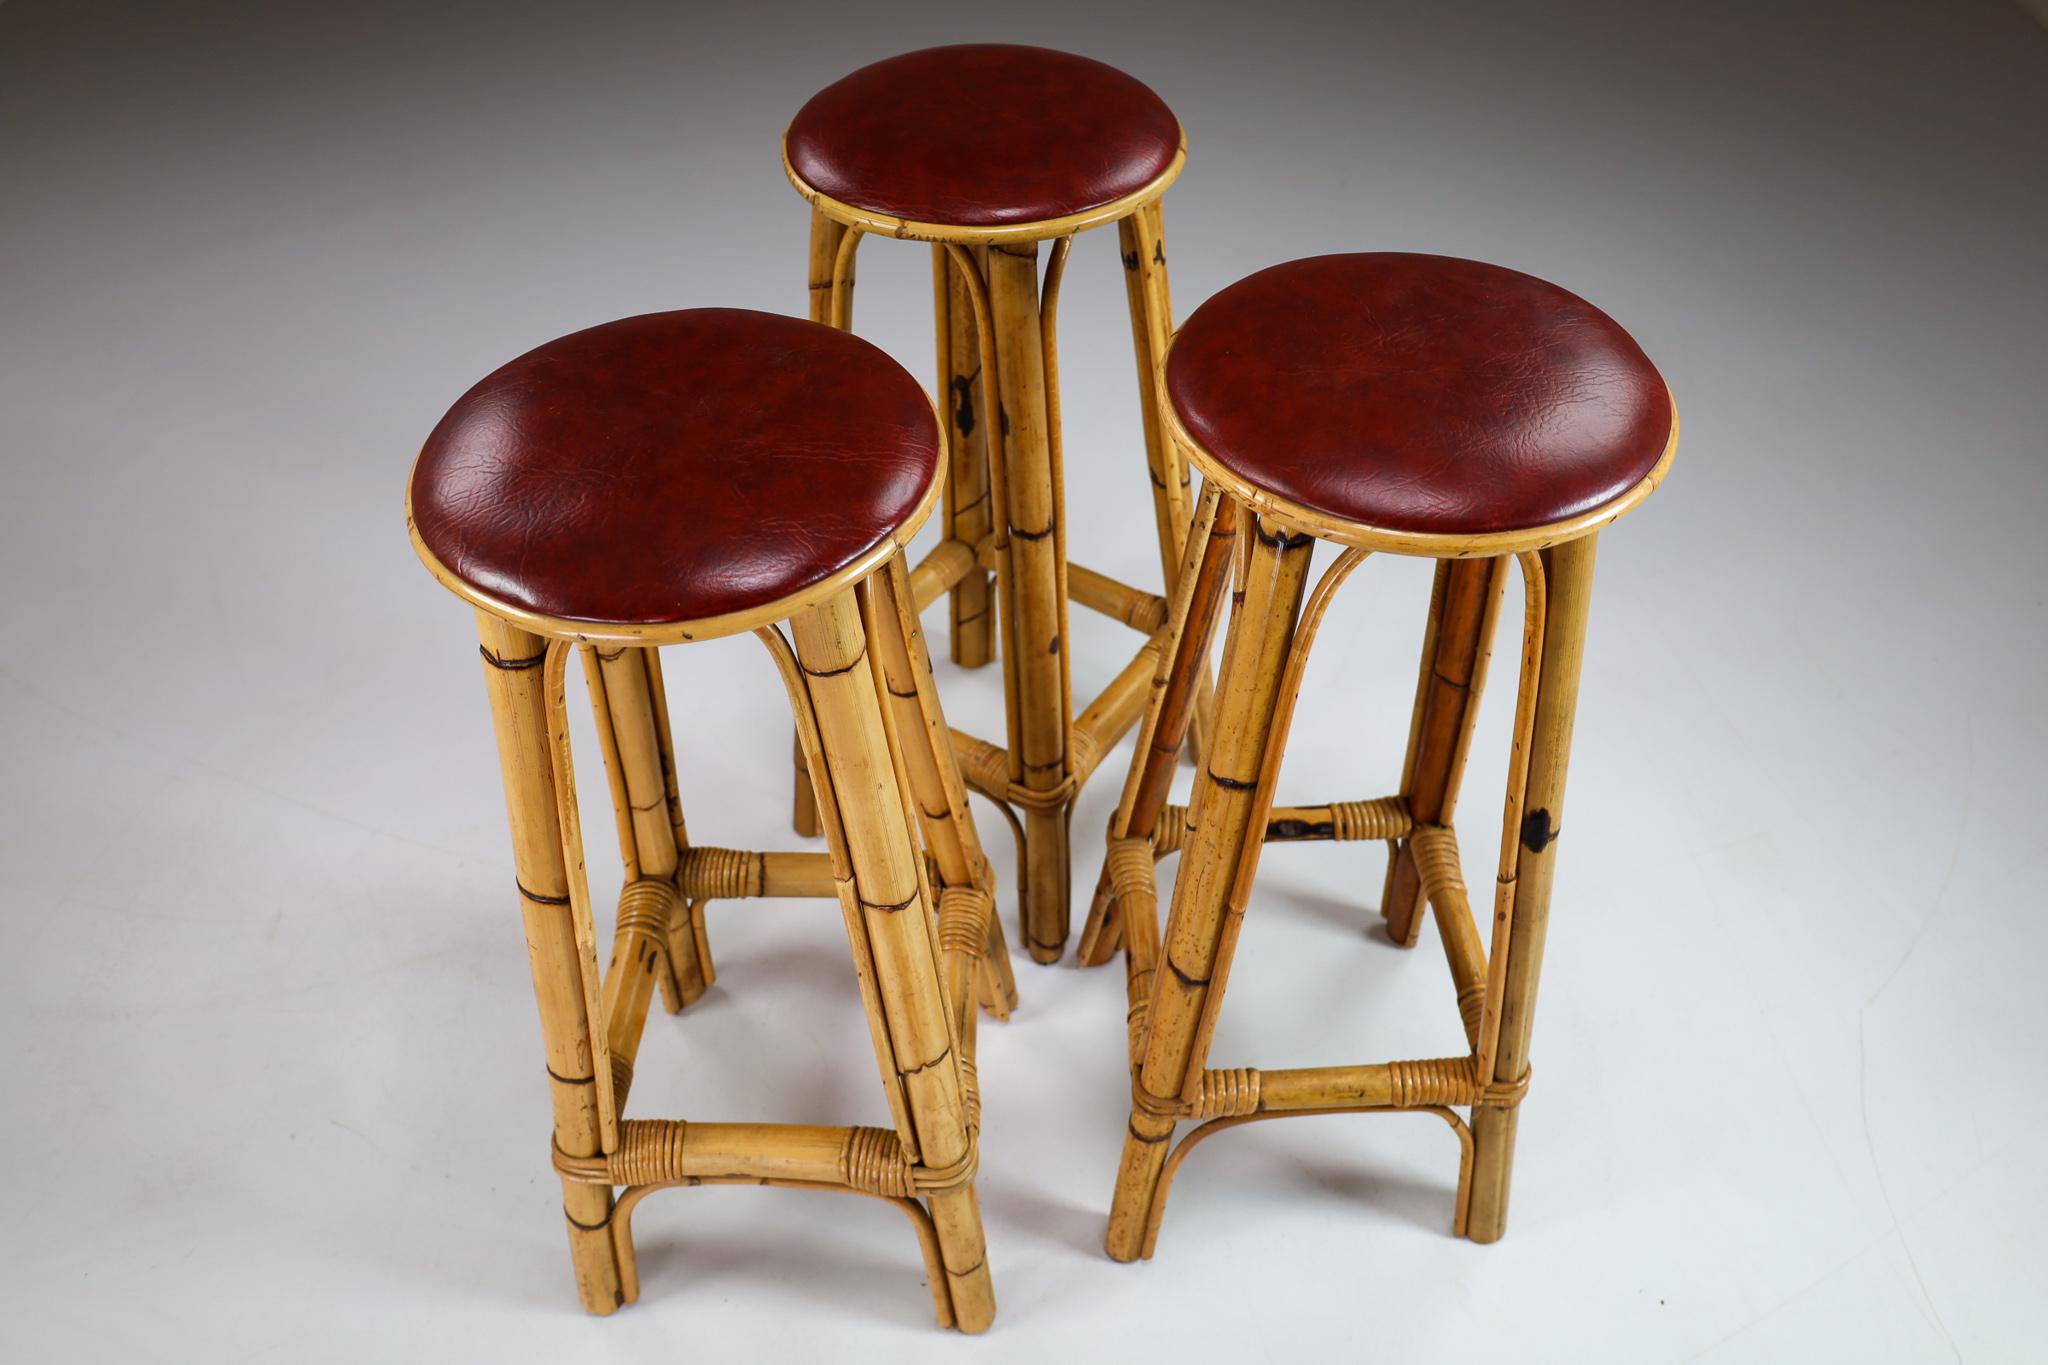 Mid-20th Century Set of Three Vintage Bamboo Barstools with Red Leather Seat, France, 1950s